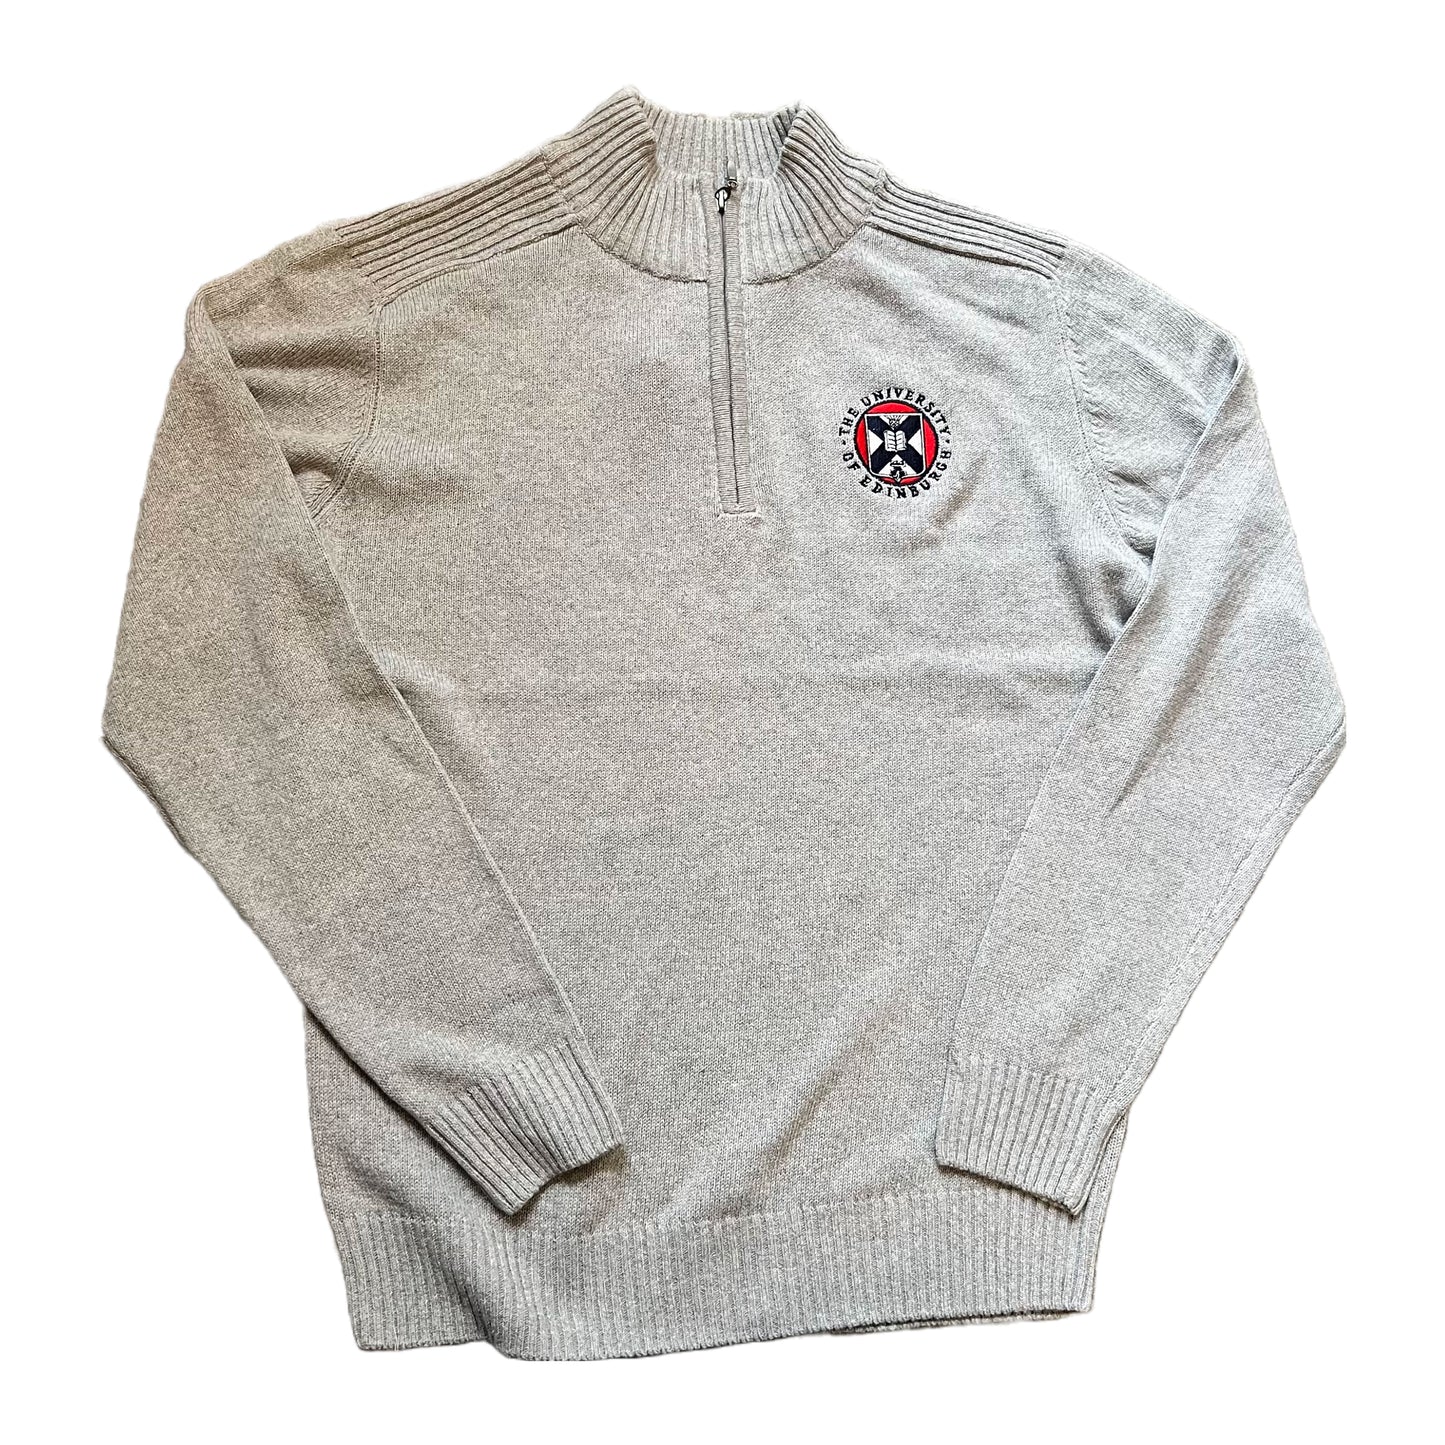 grey knitted quarter zip sweather with university crest embroidered in red white and navy